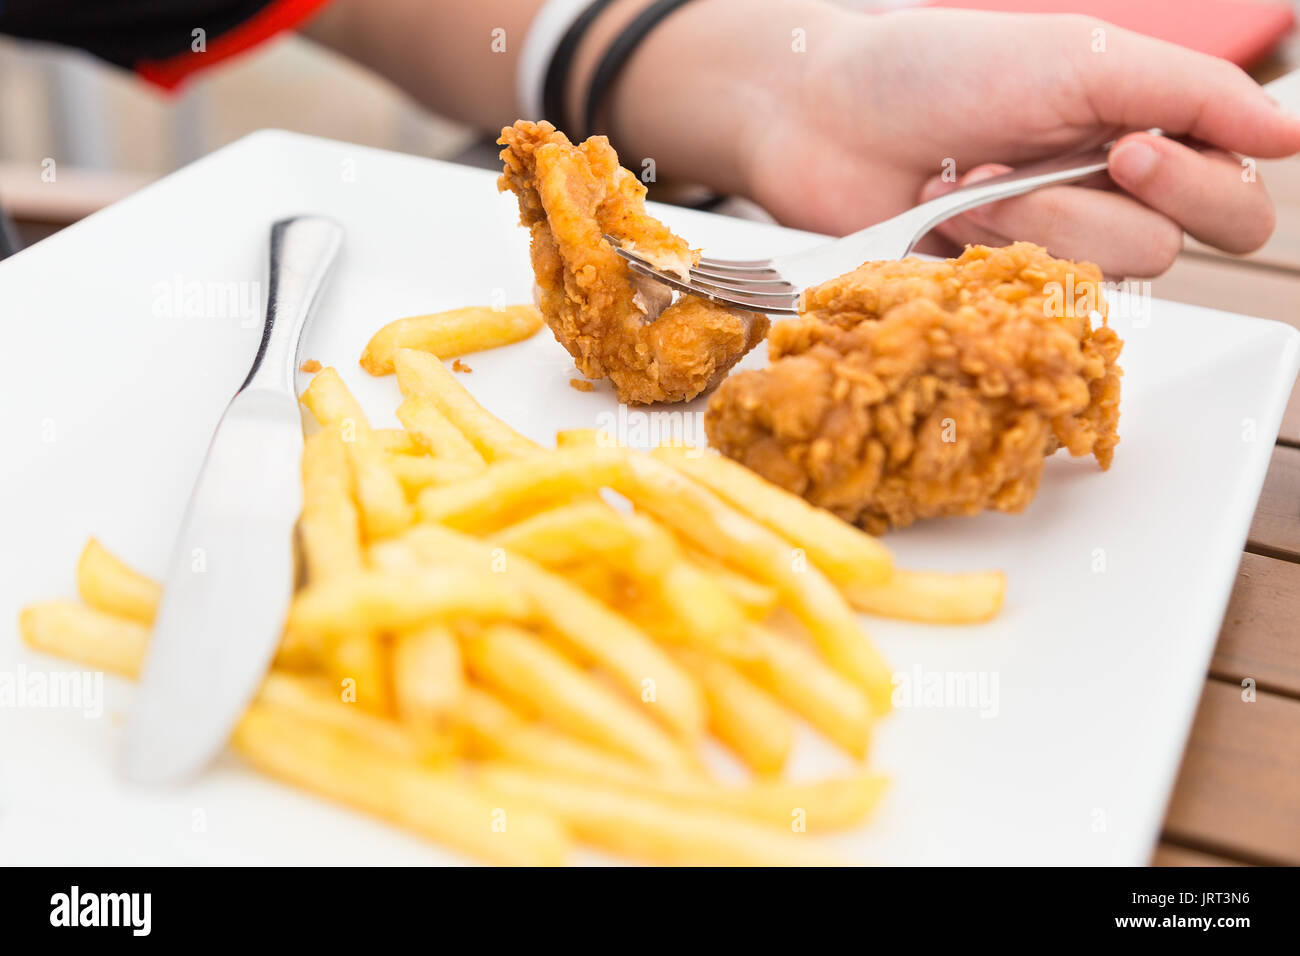 hand holding fork with strip of fried chicken and french fries on a white plate, unhealthy diet, concept picture for food that can hurt your health Stock Photo